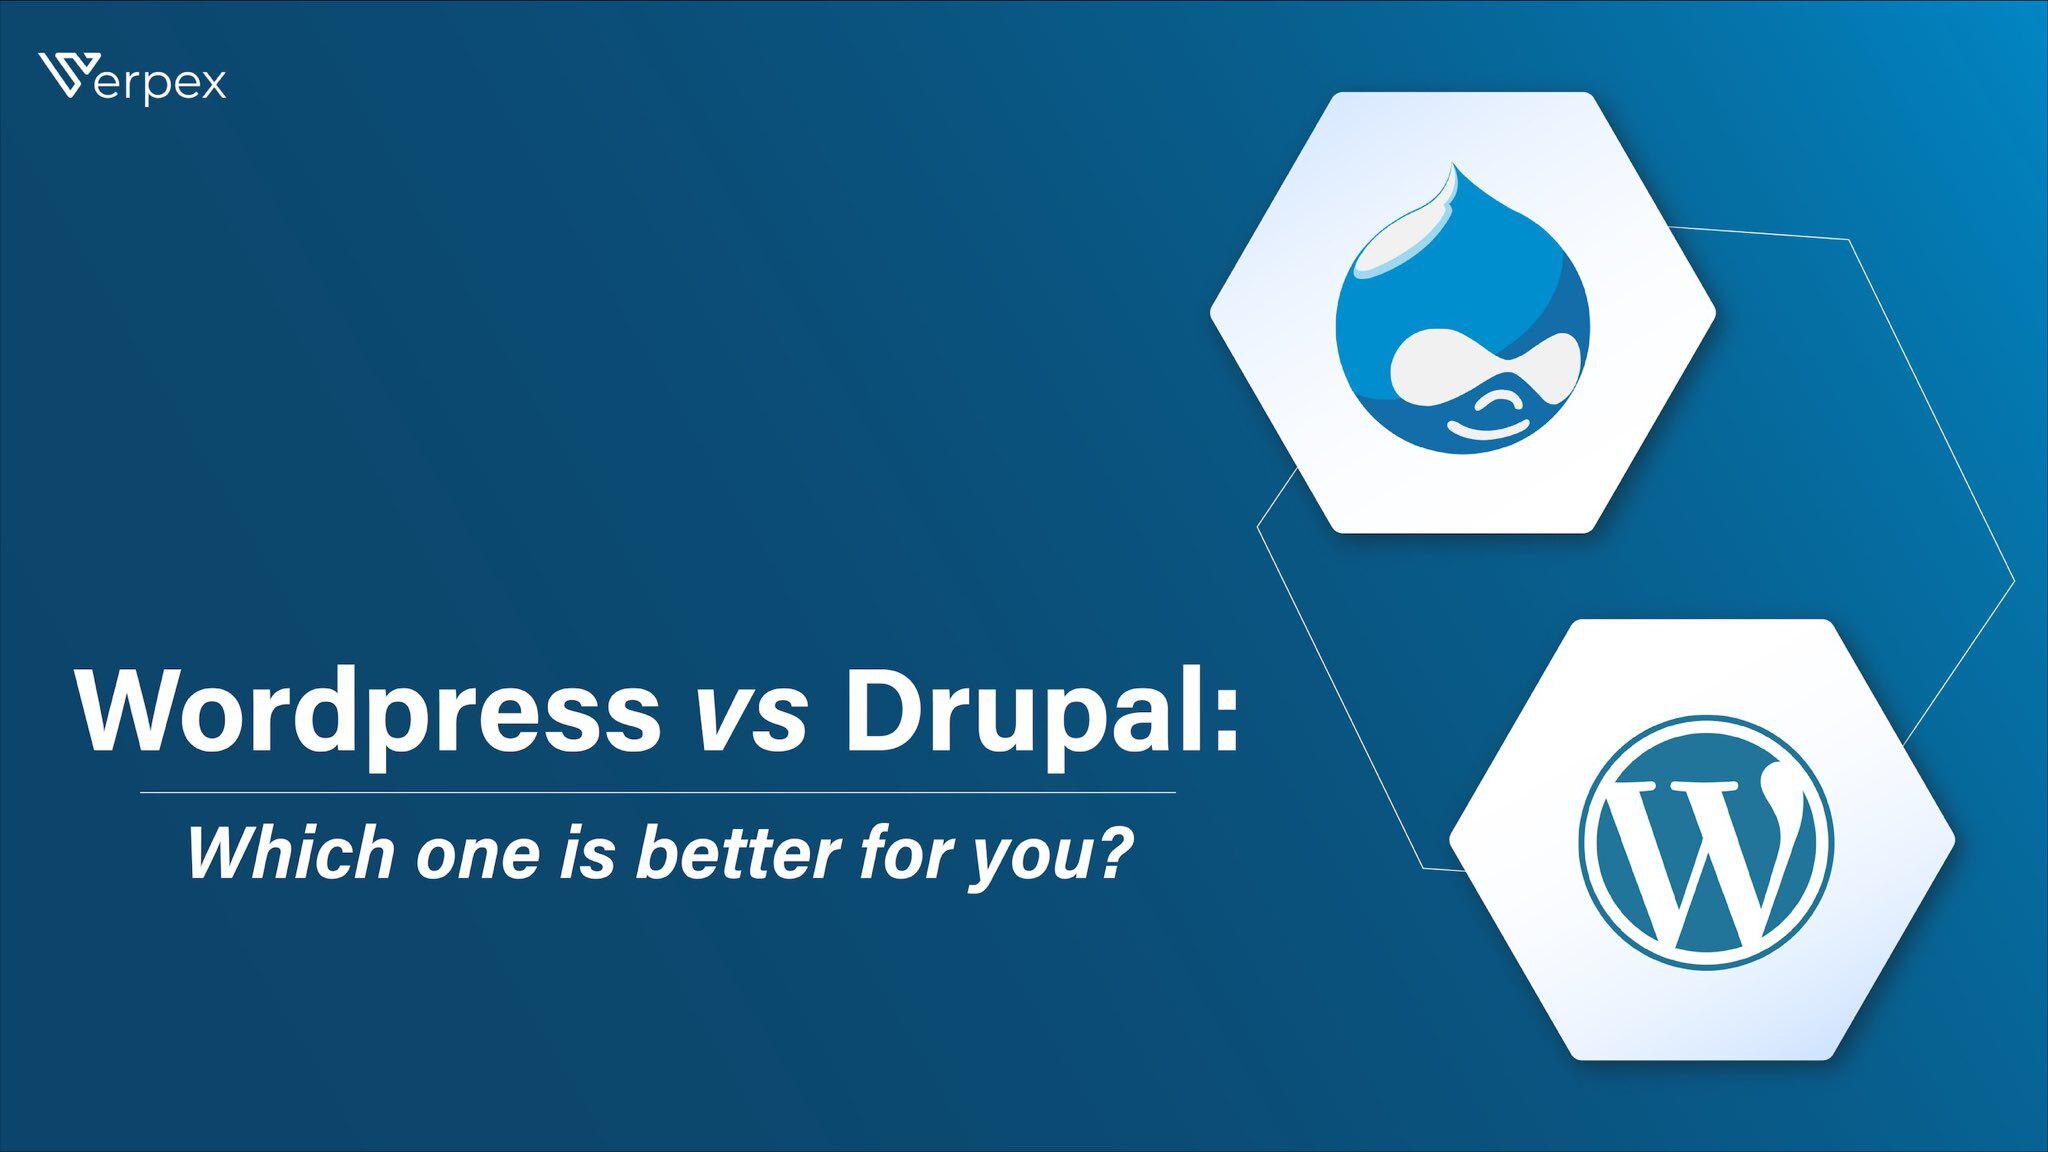 WordPress vs. Drupal: Which One is Better for You?